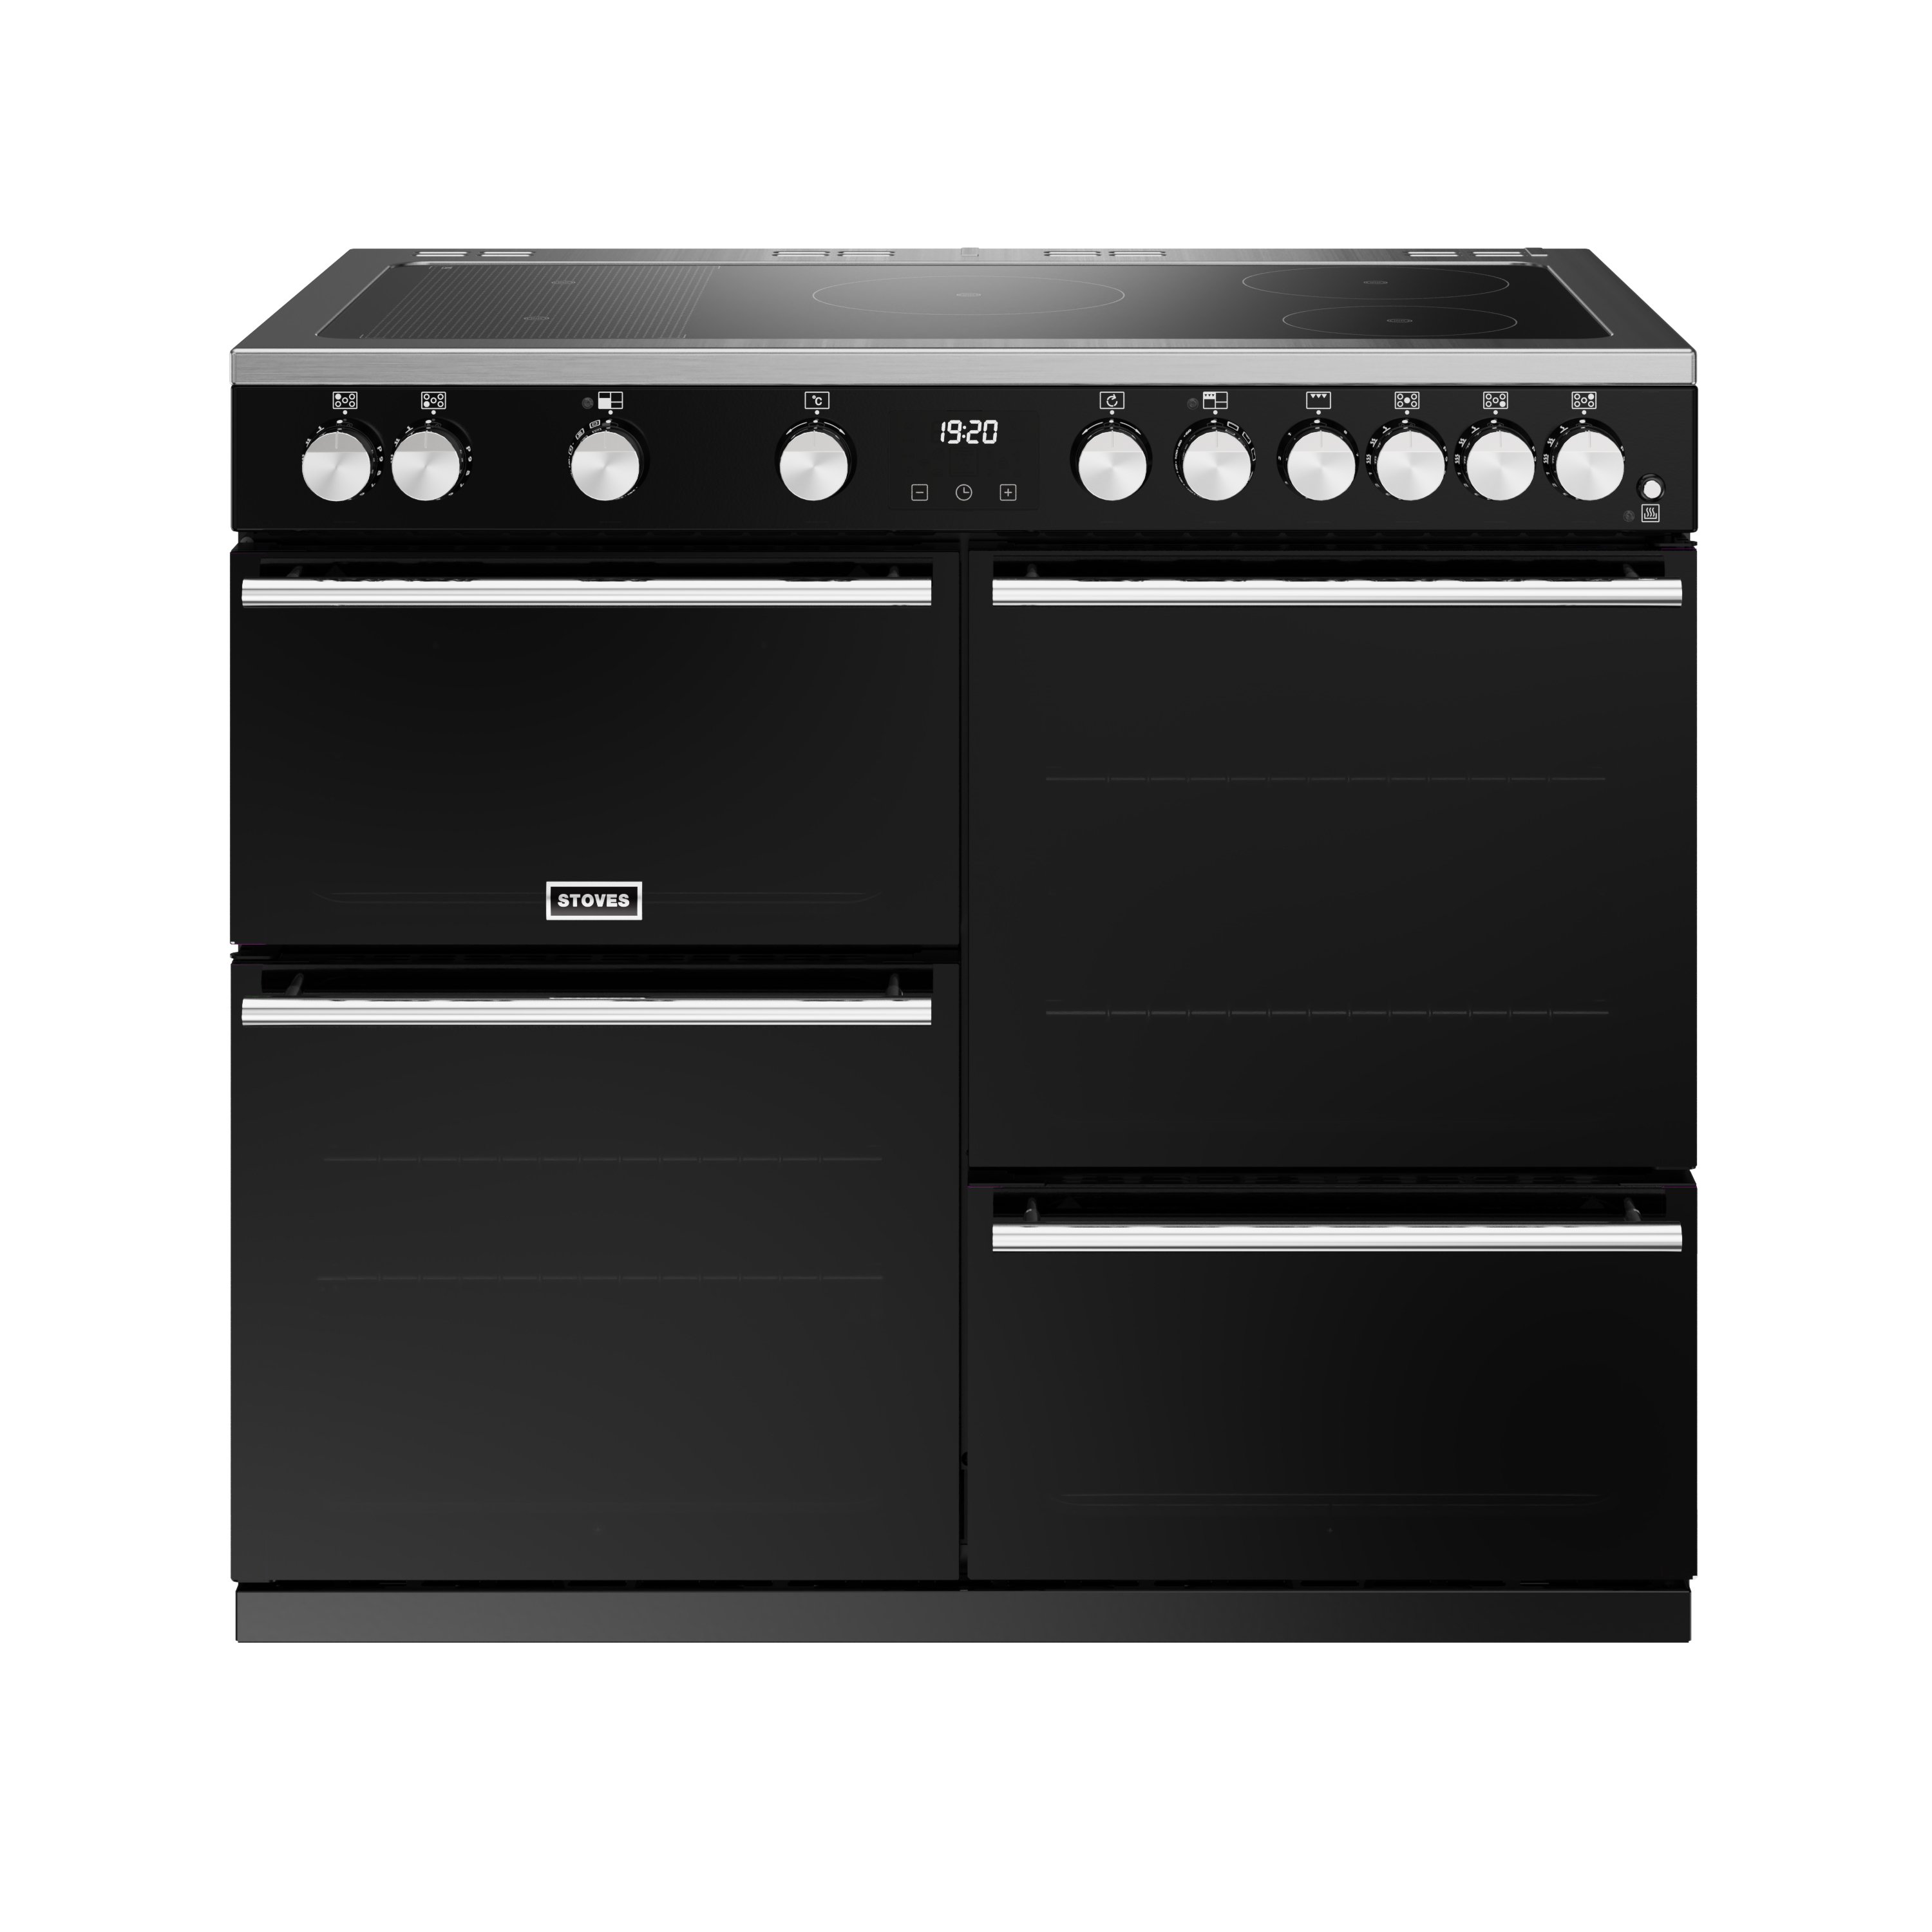 100cm electric induction range cooker with a 5 zone rotary control hob, conventional oven & grill, multifunction main oven with TrueTemp digital thermostat, fanned second oven and dedicated slow cook oven